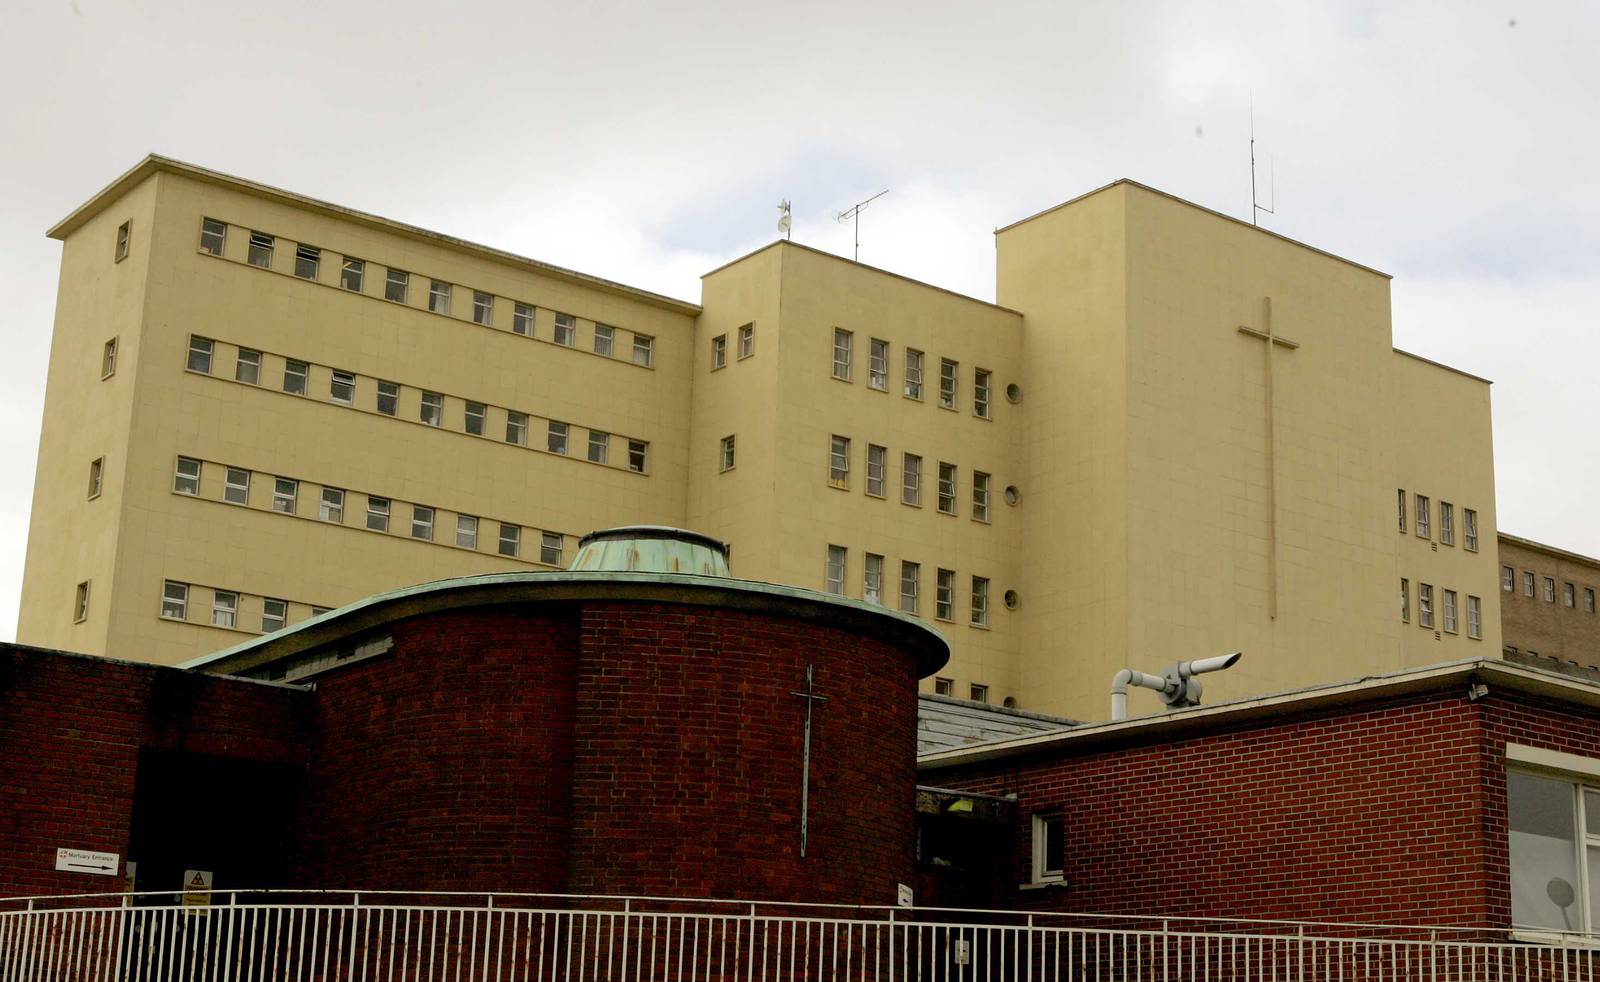 Photograph: David Sleator
Date;23th March 2007
Our Lady of Lourdes Hospital Drogheda